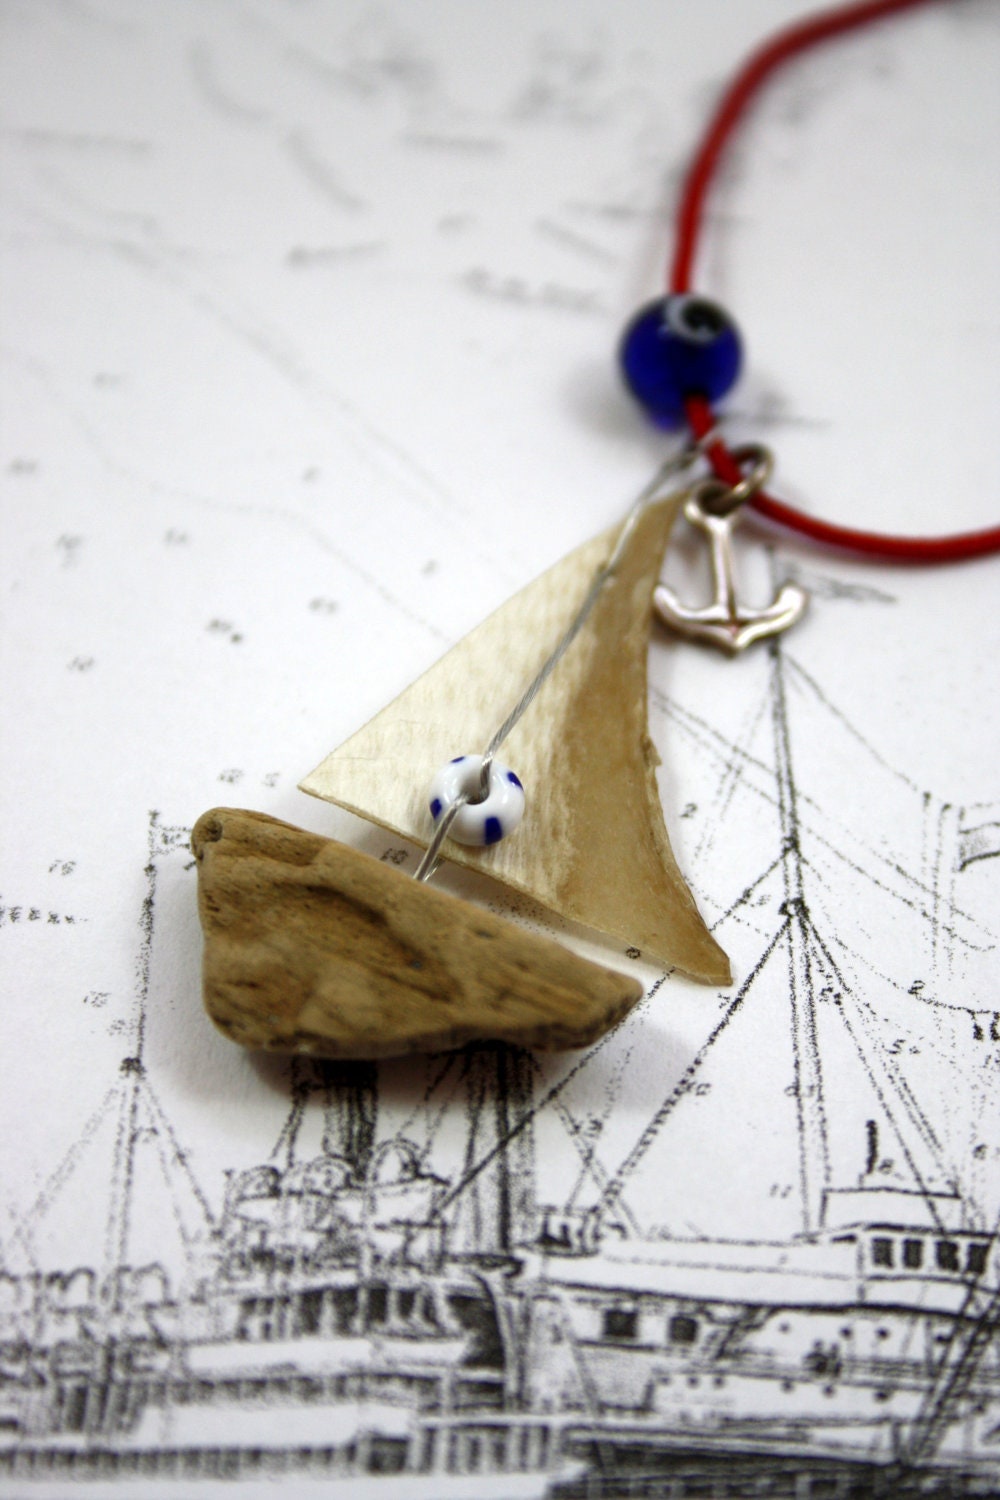 driftwood sailboat necklace with sail from genuine parchment , it has an anchor from sterling silver and a life ring......"ship ahoy" - Yalos